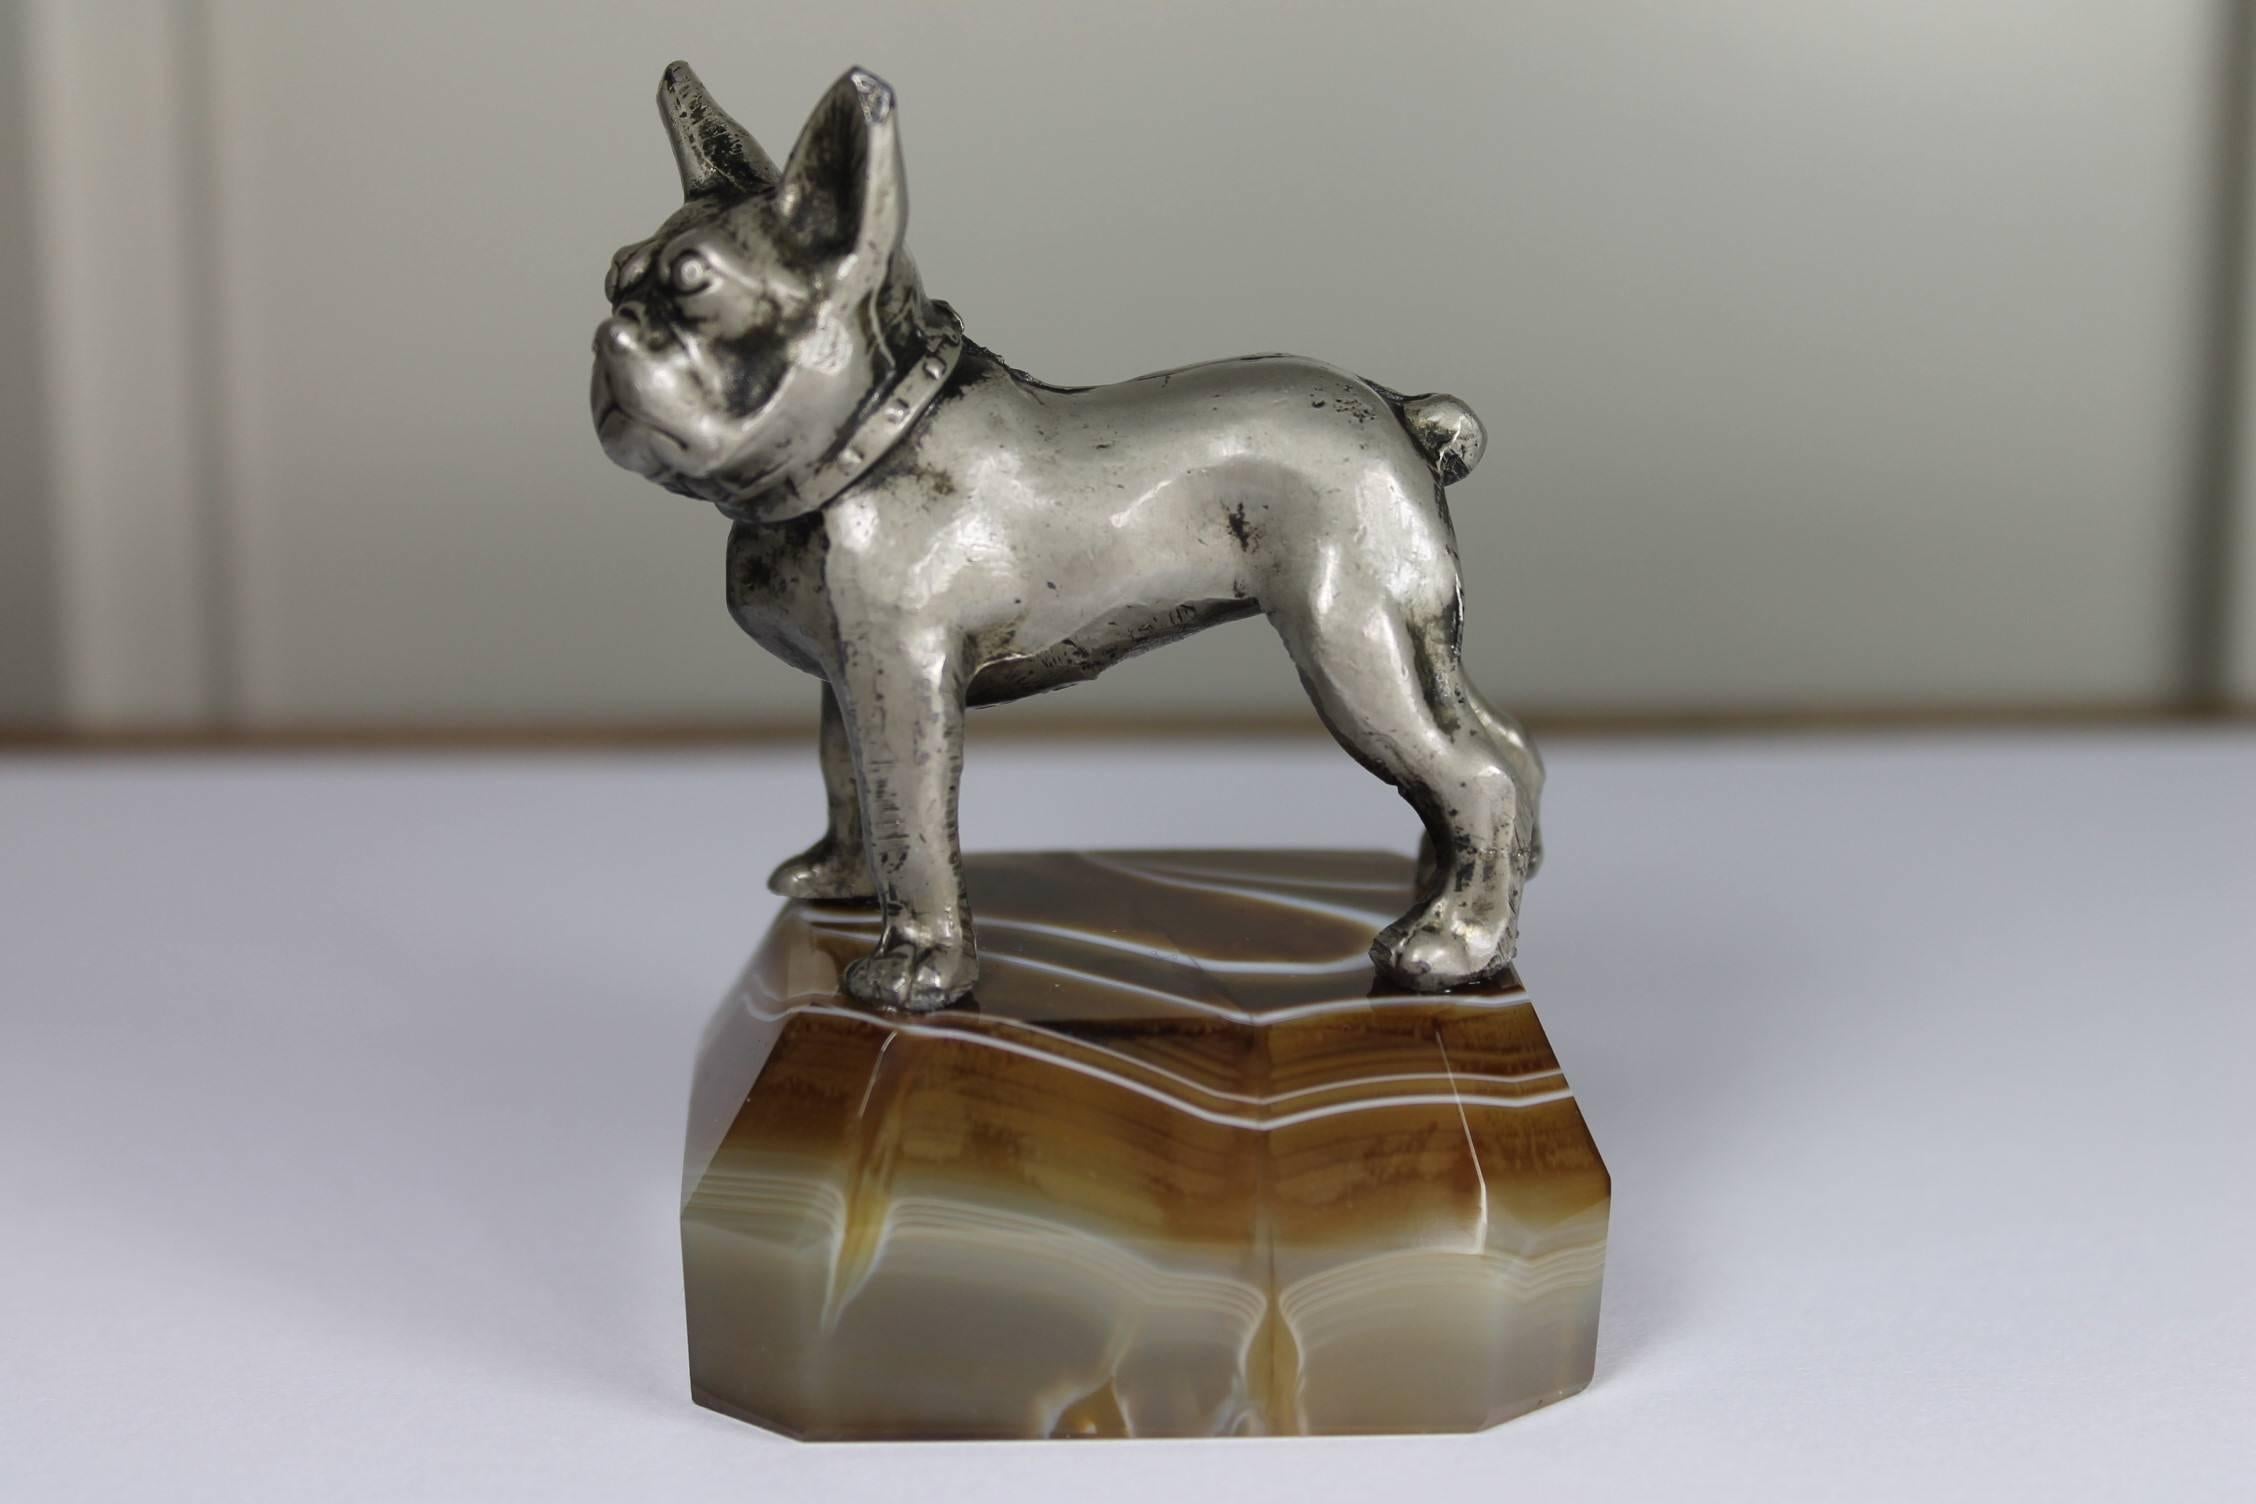 Paperweight with French Bulldog.
This Art Deco paper press or paper weight has a metal bulldog sculpture on a polished brown onyx stone.
The bulldog figurine is signed on the belly: Made in Japan.
It's a detailed Frenchie sculpture.
The onyx